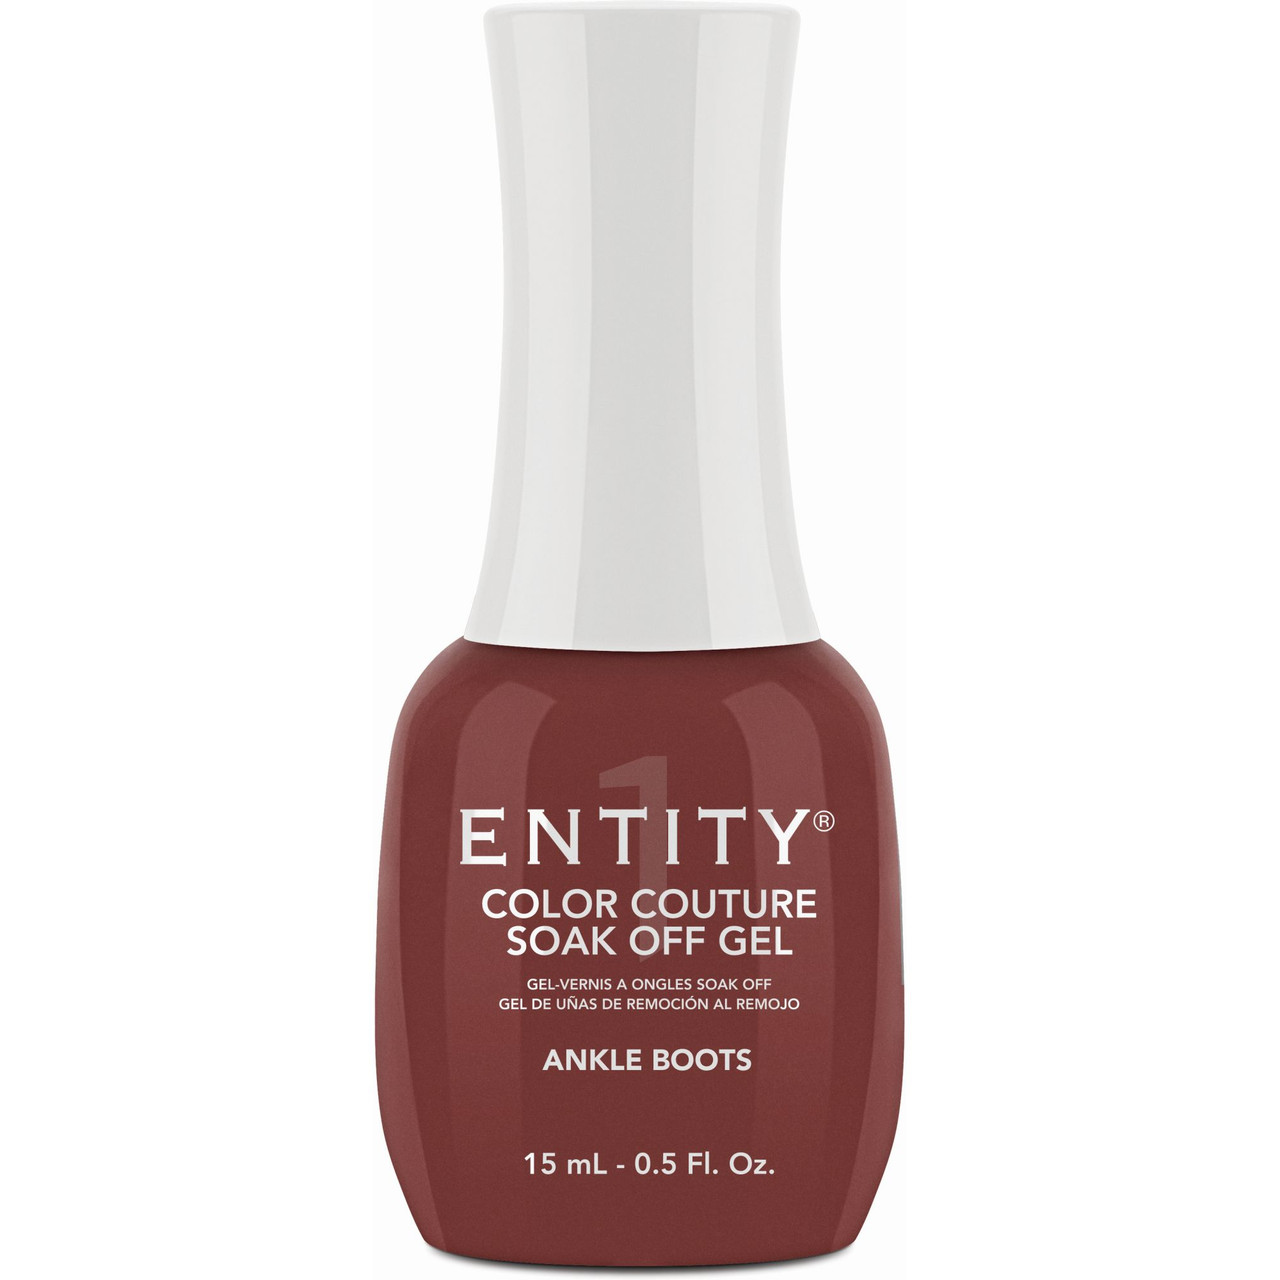 Boots Limited Edition Barry M Products | Nail Paint & Red Carpet Ready  Palette - Sophie Laura